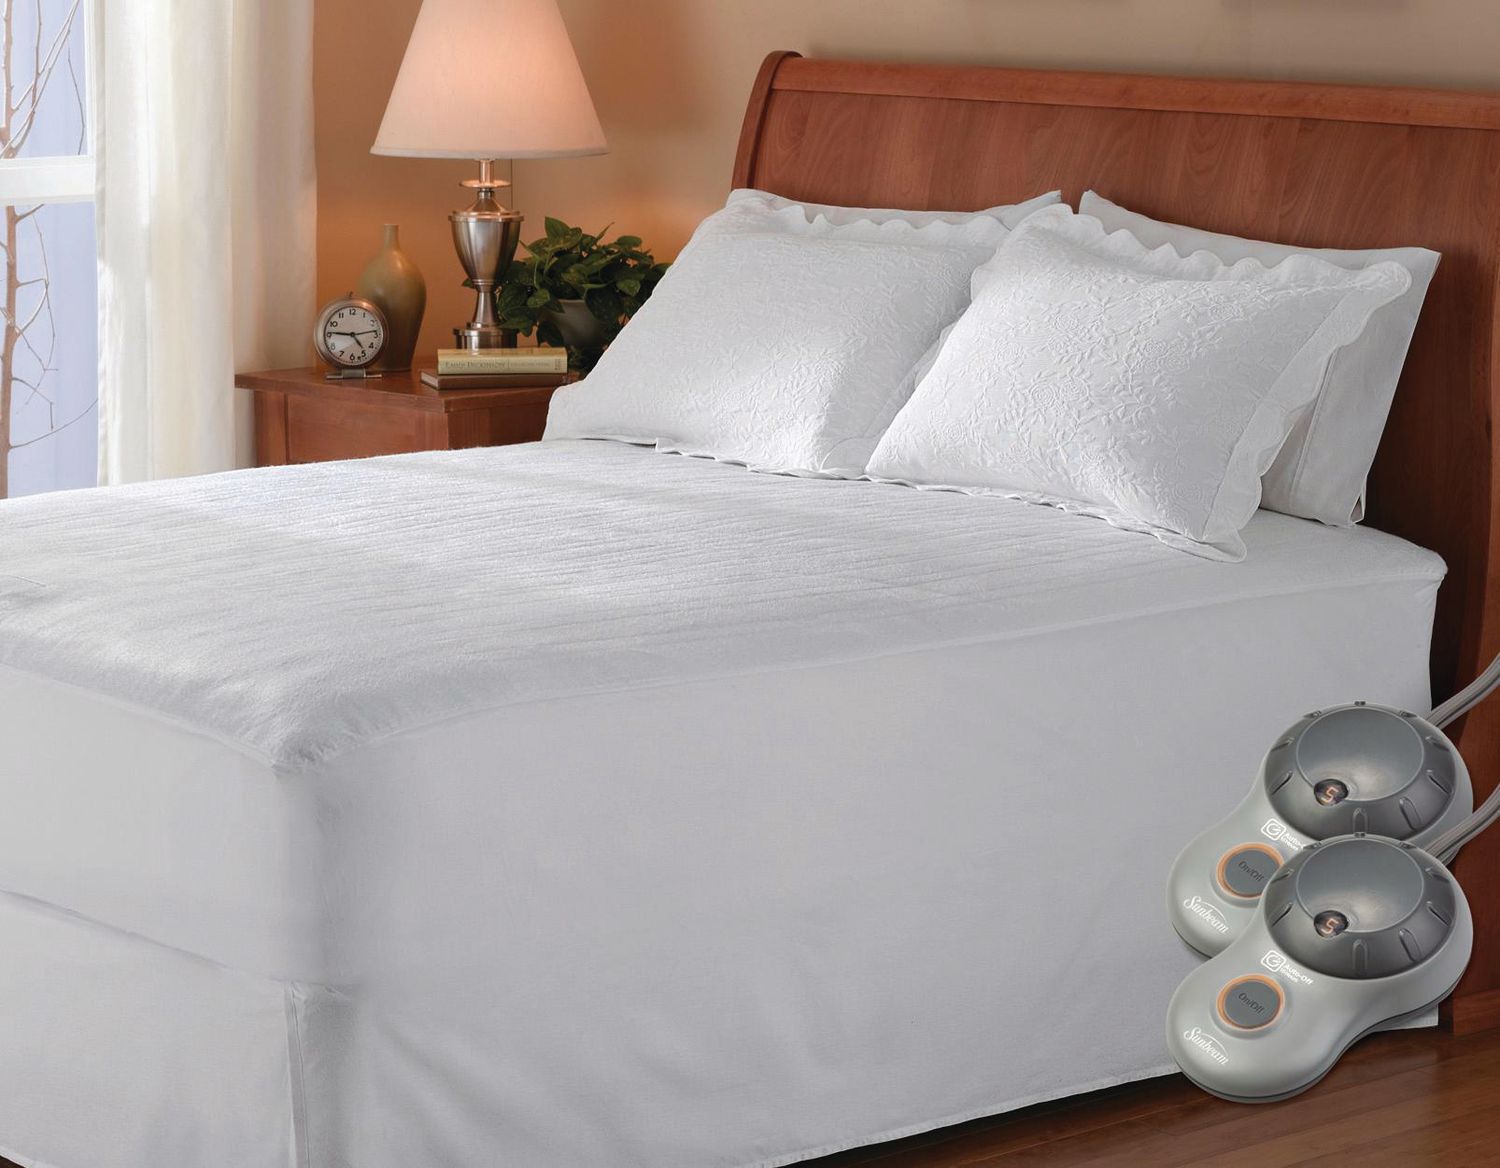 sunbeam quilted heated mattress pad controllers blinking